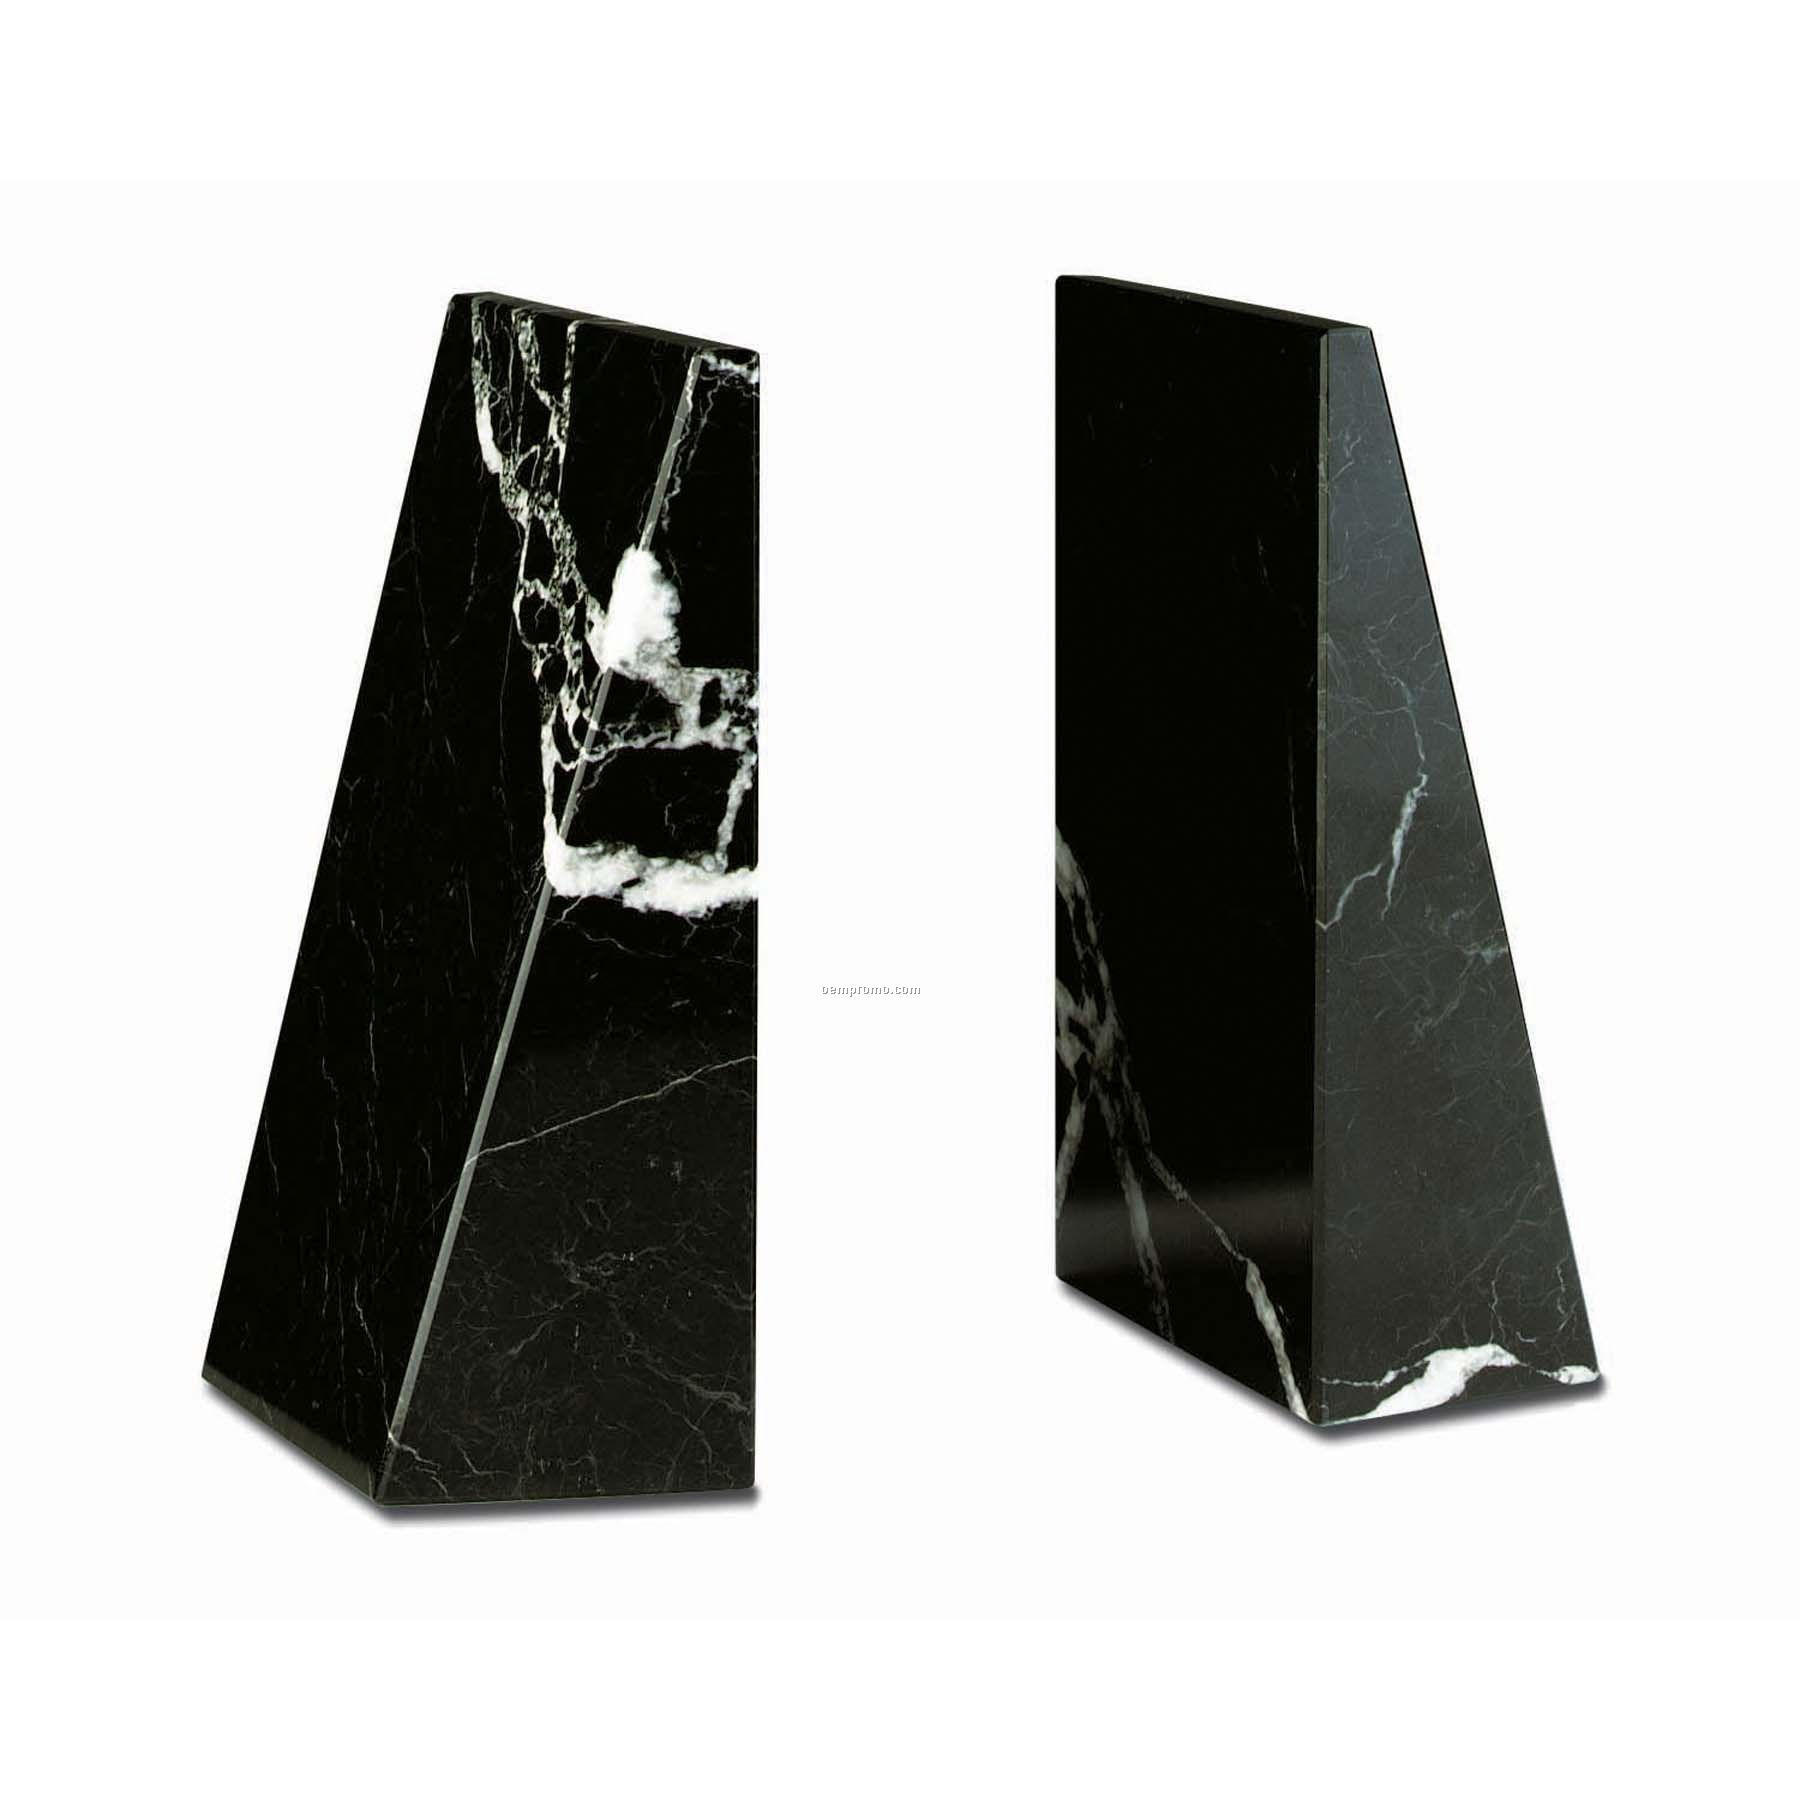 Tapered Professional Bookends - Black Zebra